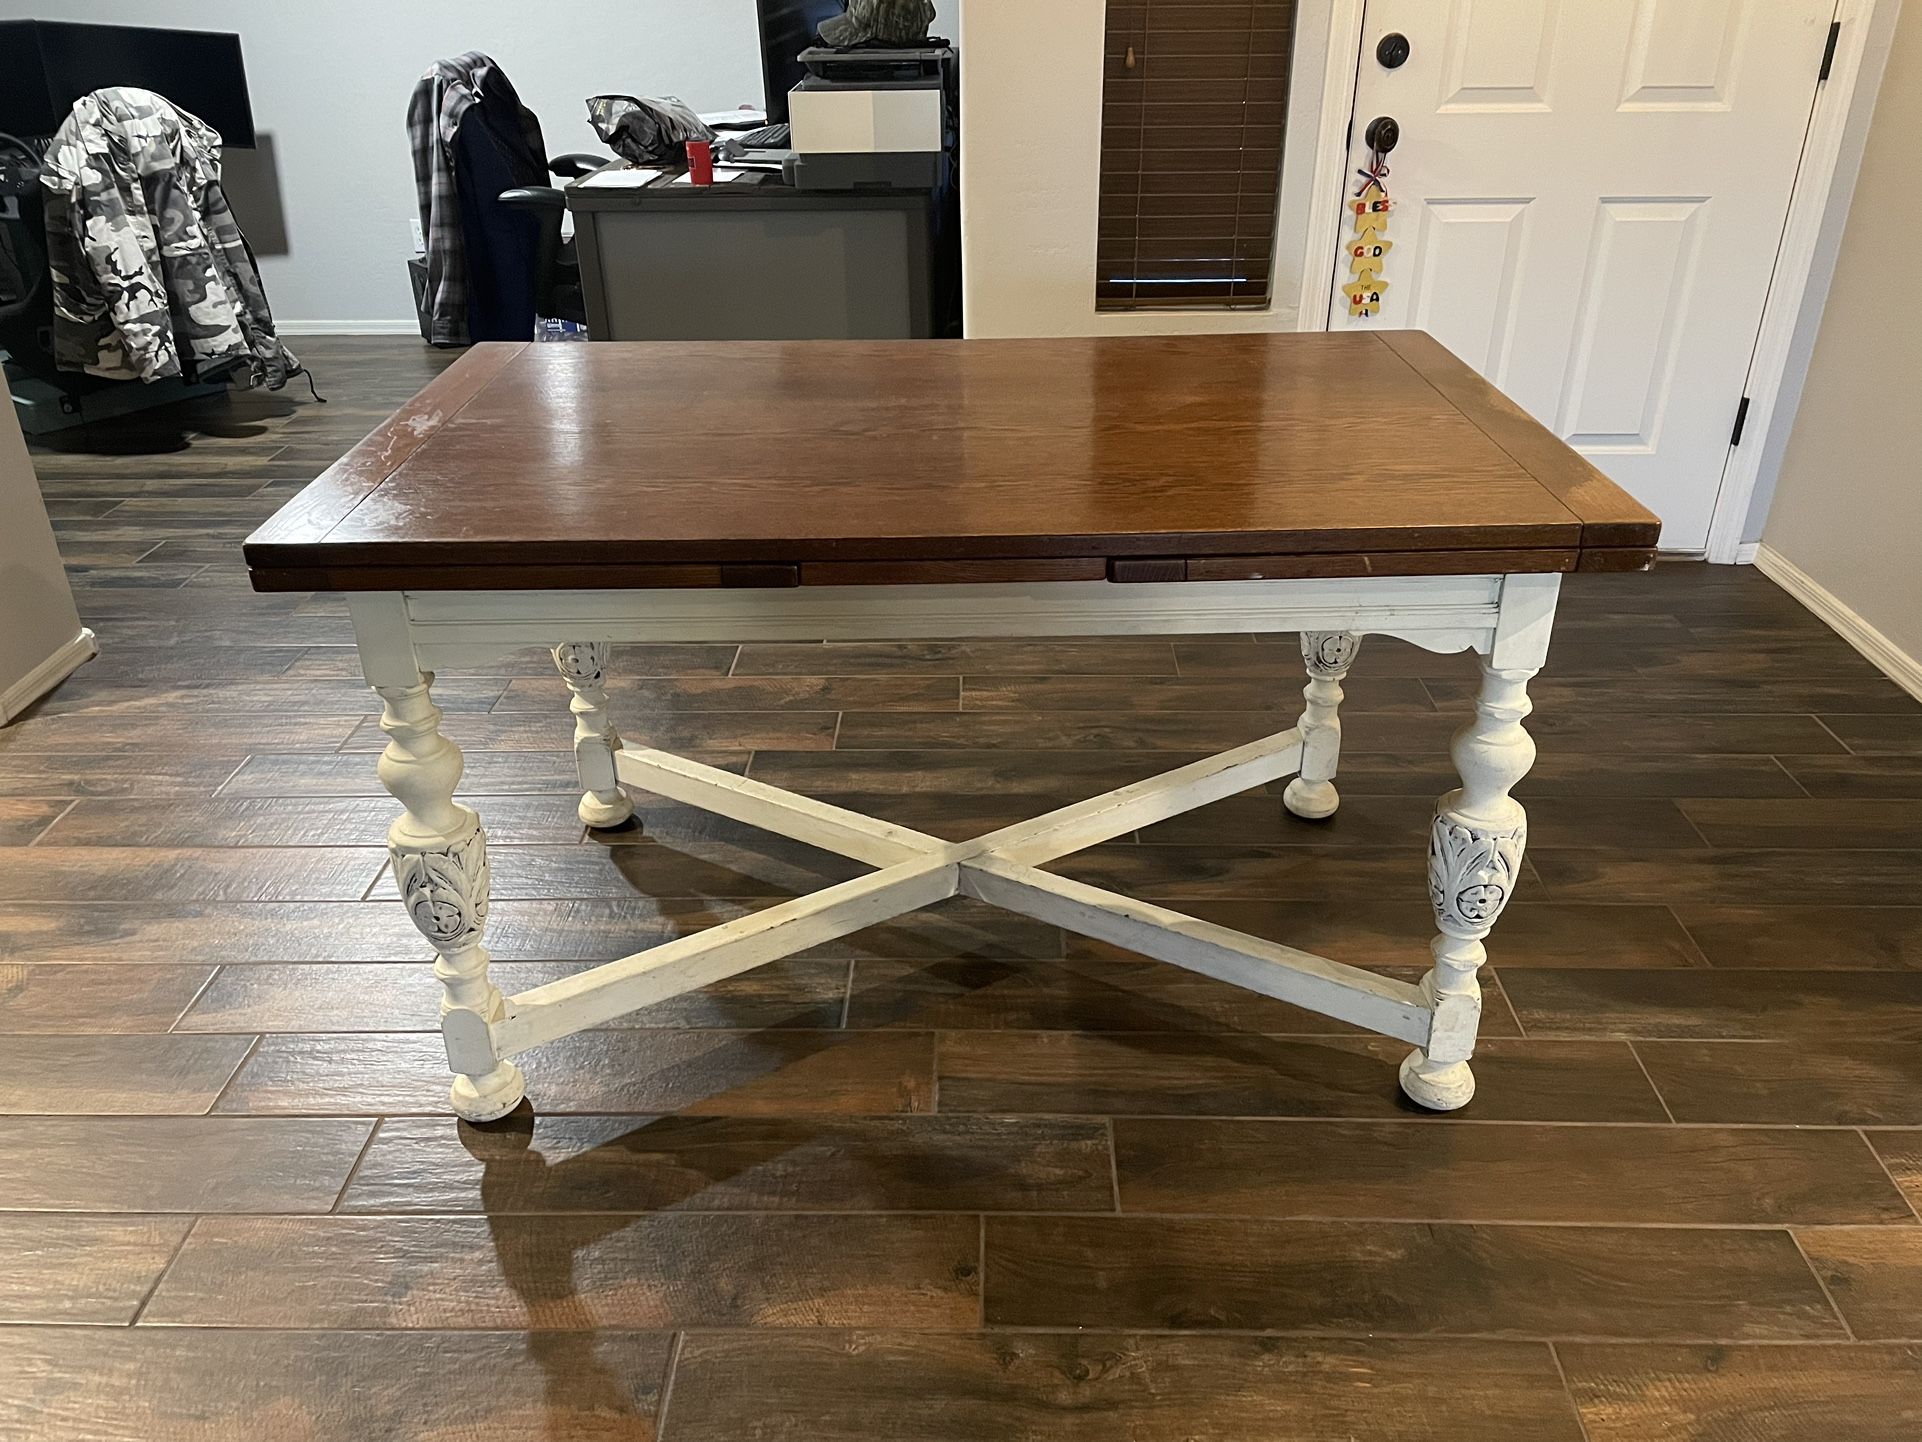 Vintage/Antique Dining Table